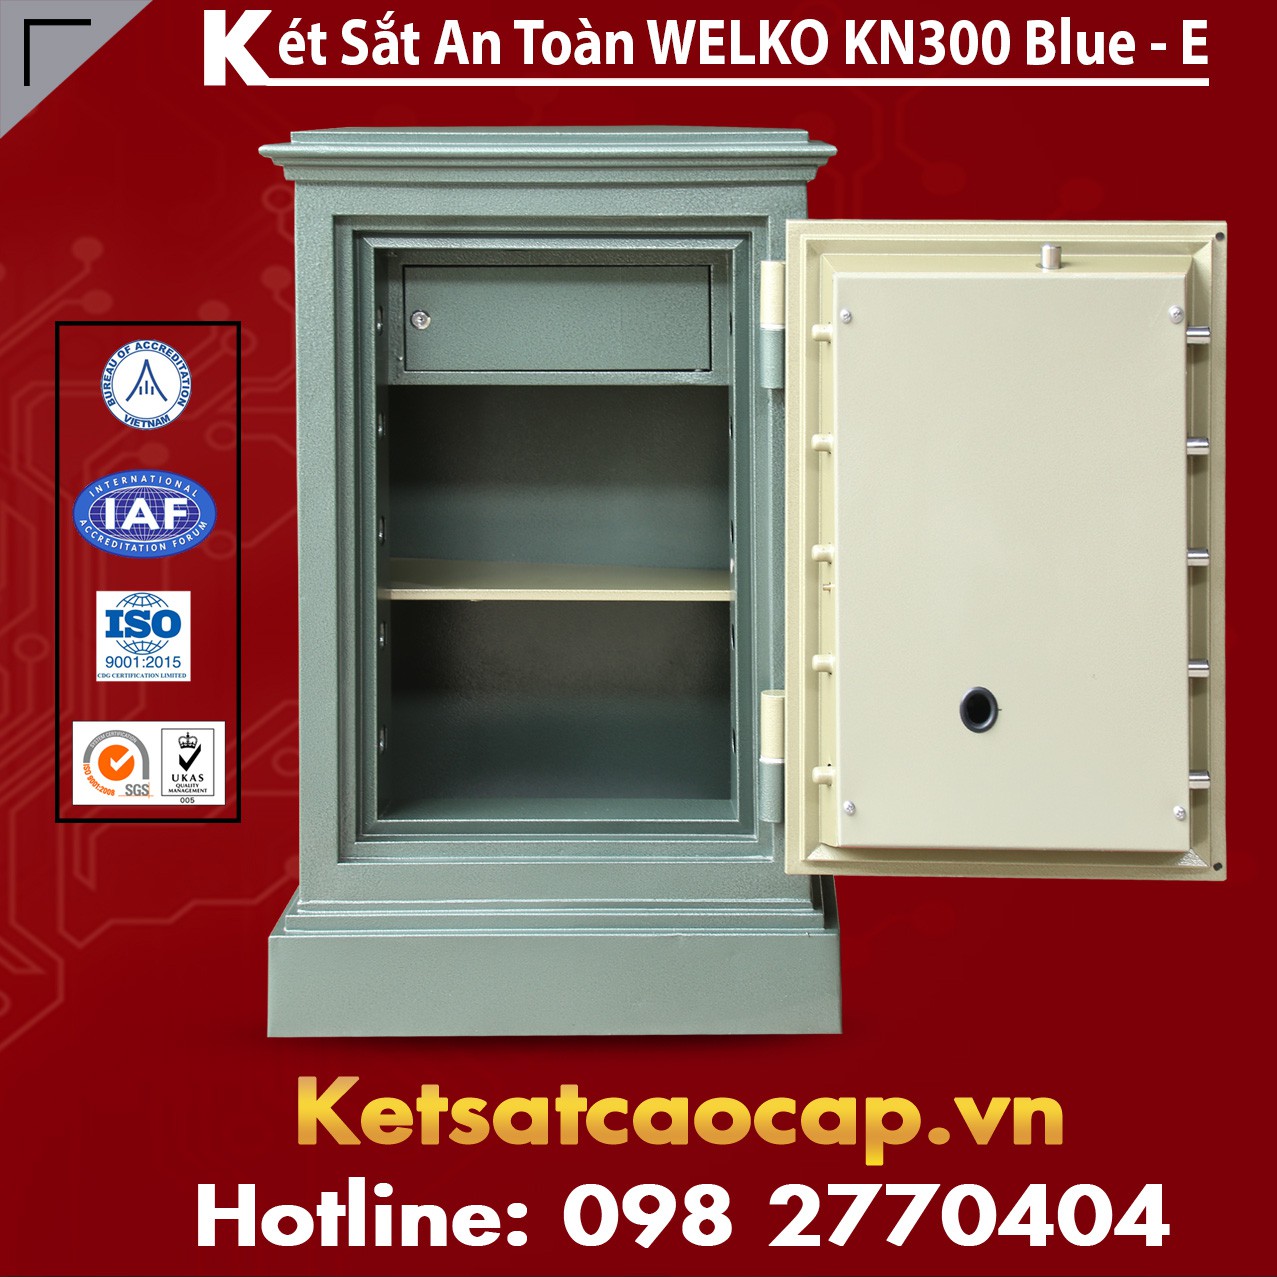 Best Home Safe Made In Viet Nam Tim Dai Ly Cap 1 Ket Sat Chong Chay Sai Gon Cao Cap